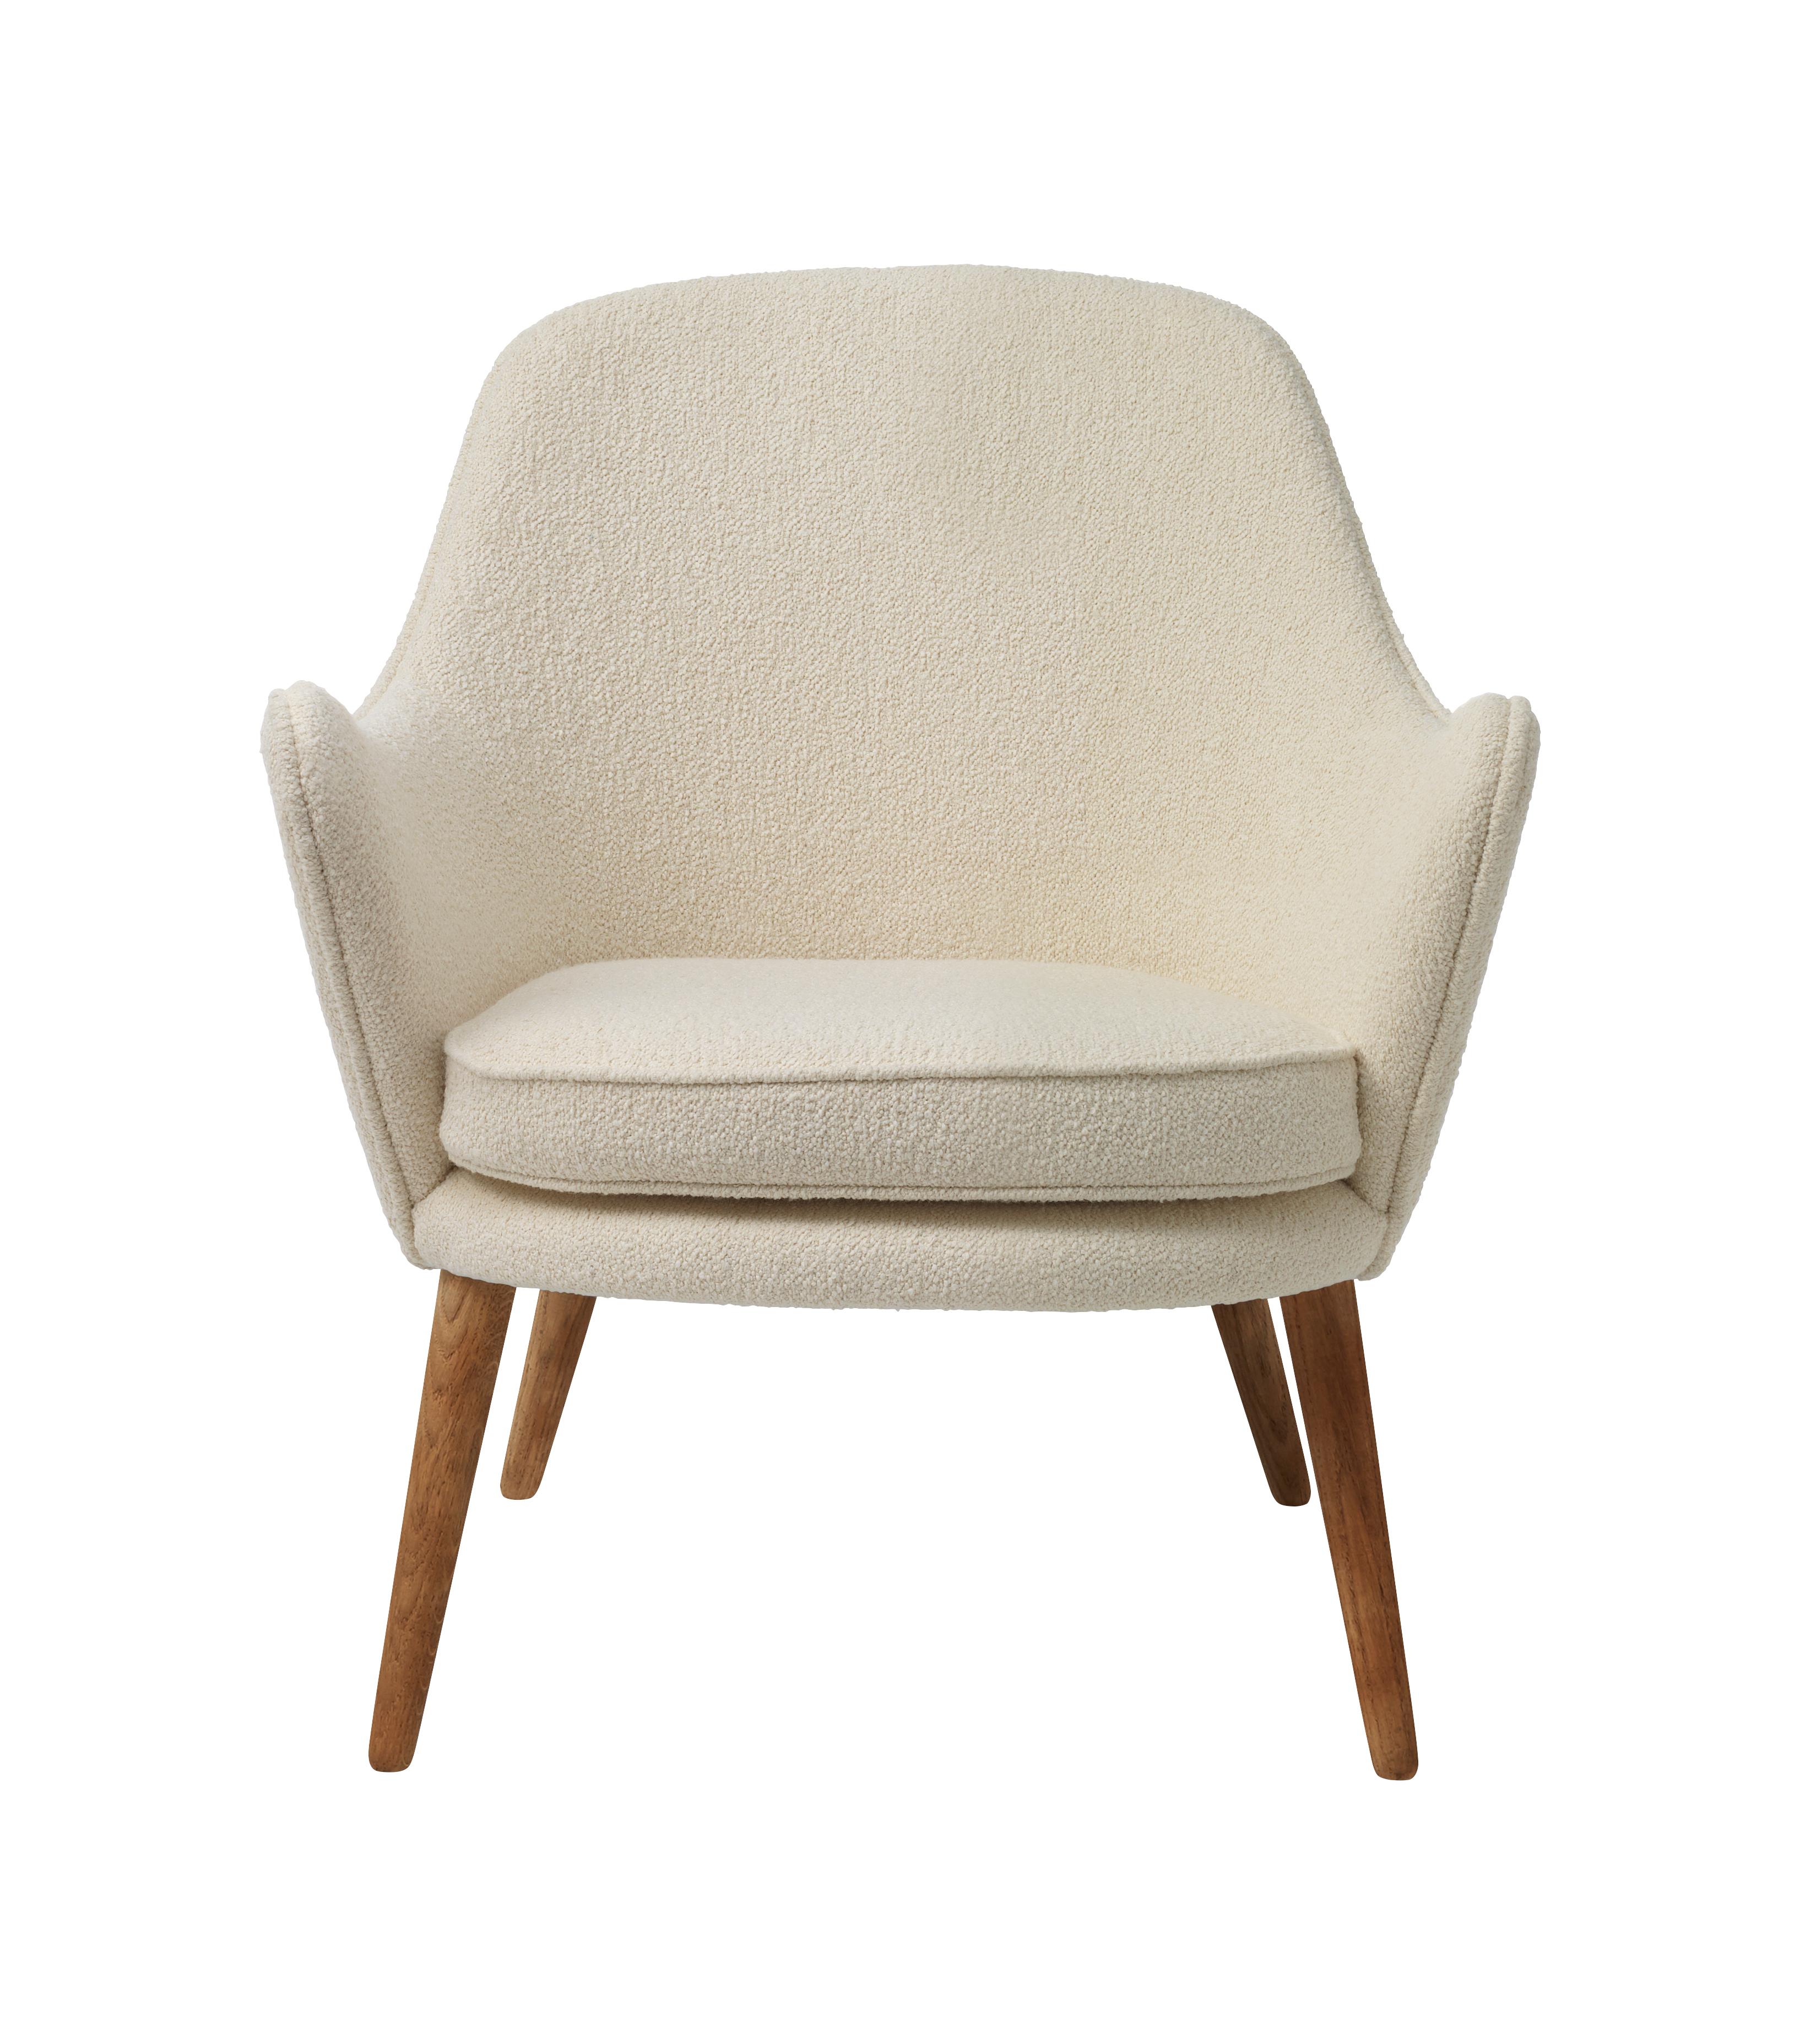 For Sale: White (Barnum 24) Dwell Lounge Chair, by Hans Olsen from Warm Nordic